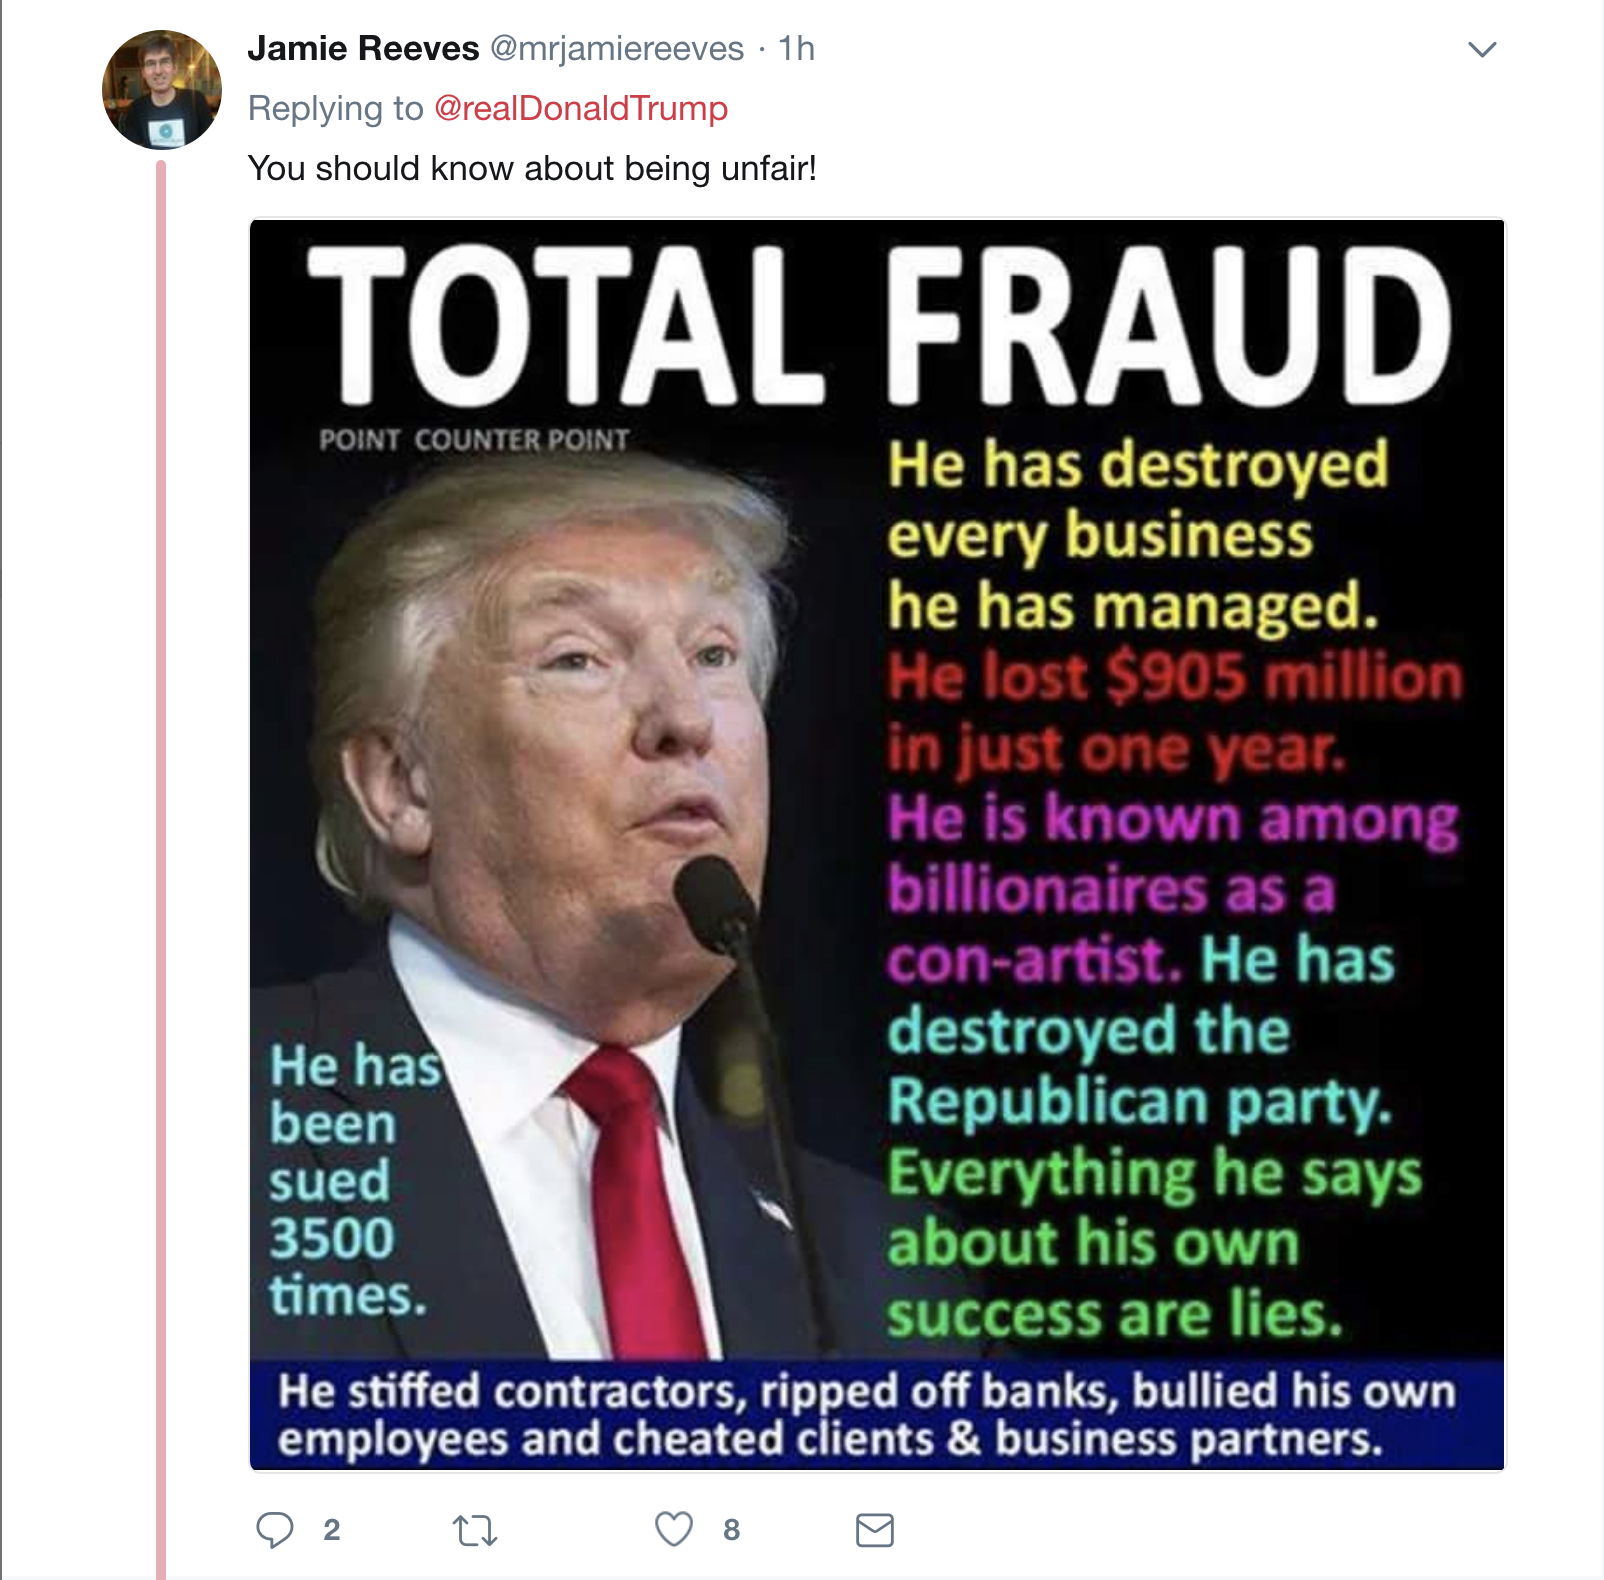 Screen-Shot-2018-04-09-at-1.11.23-PM Trump Responds To Desperate U.S. Farmers Facing Total Financial Destruction Like A Punk Donald Trump Economy Foreign Policy Politics Top Stories 